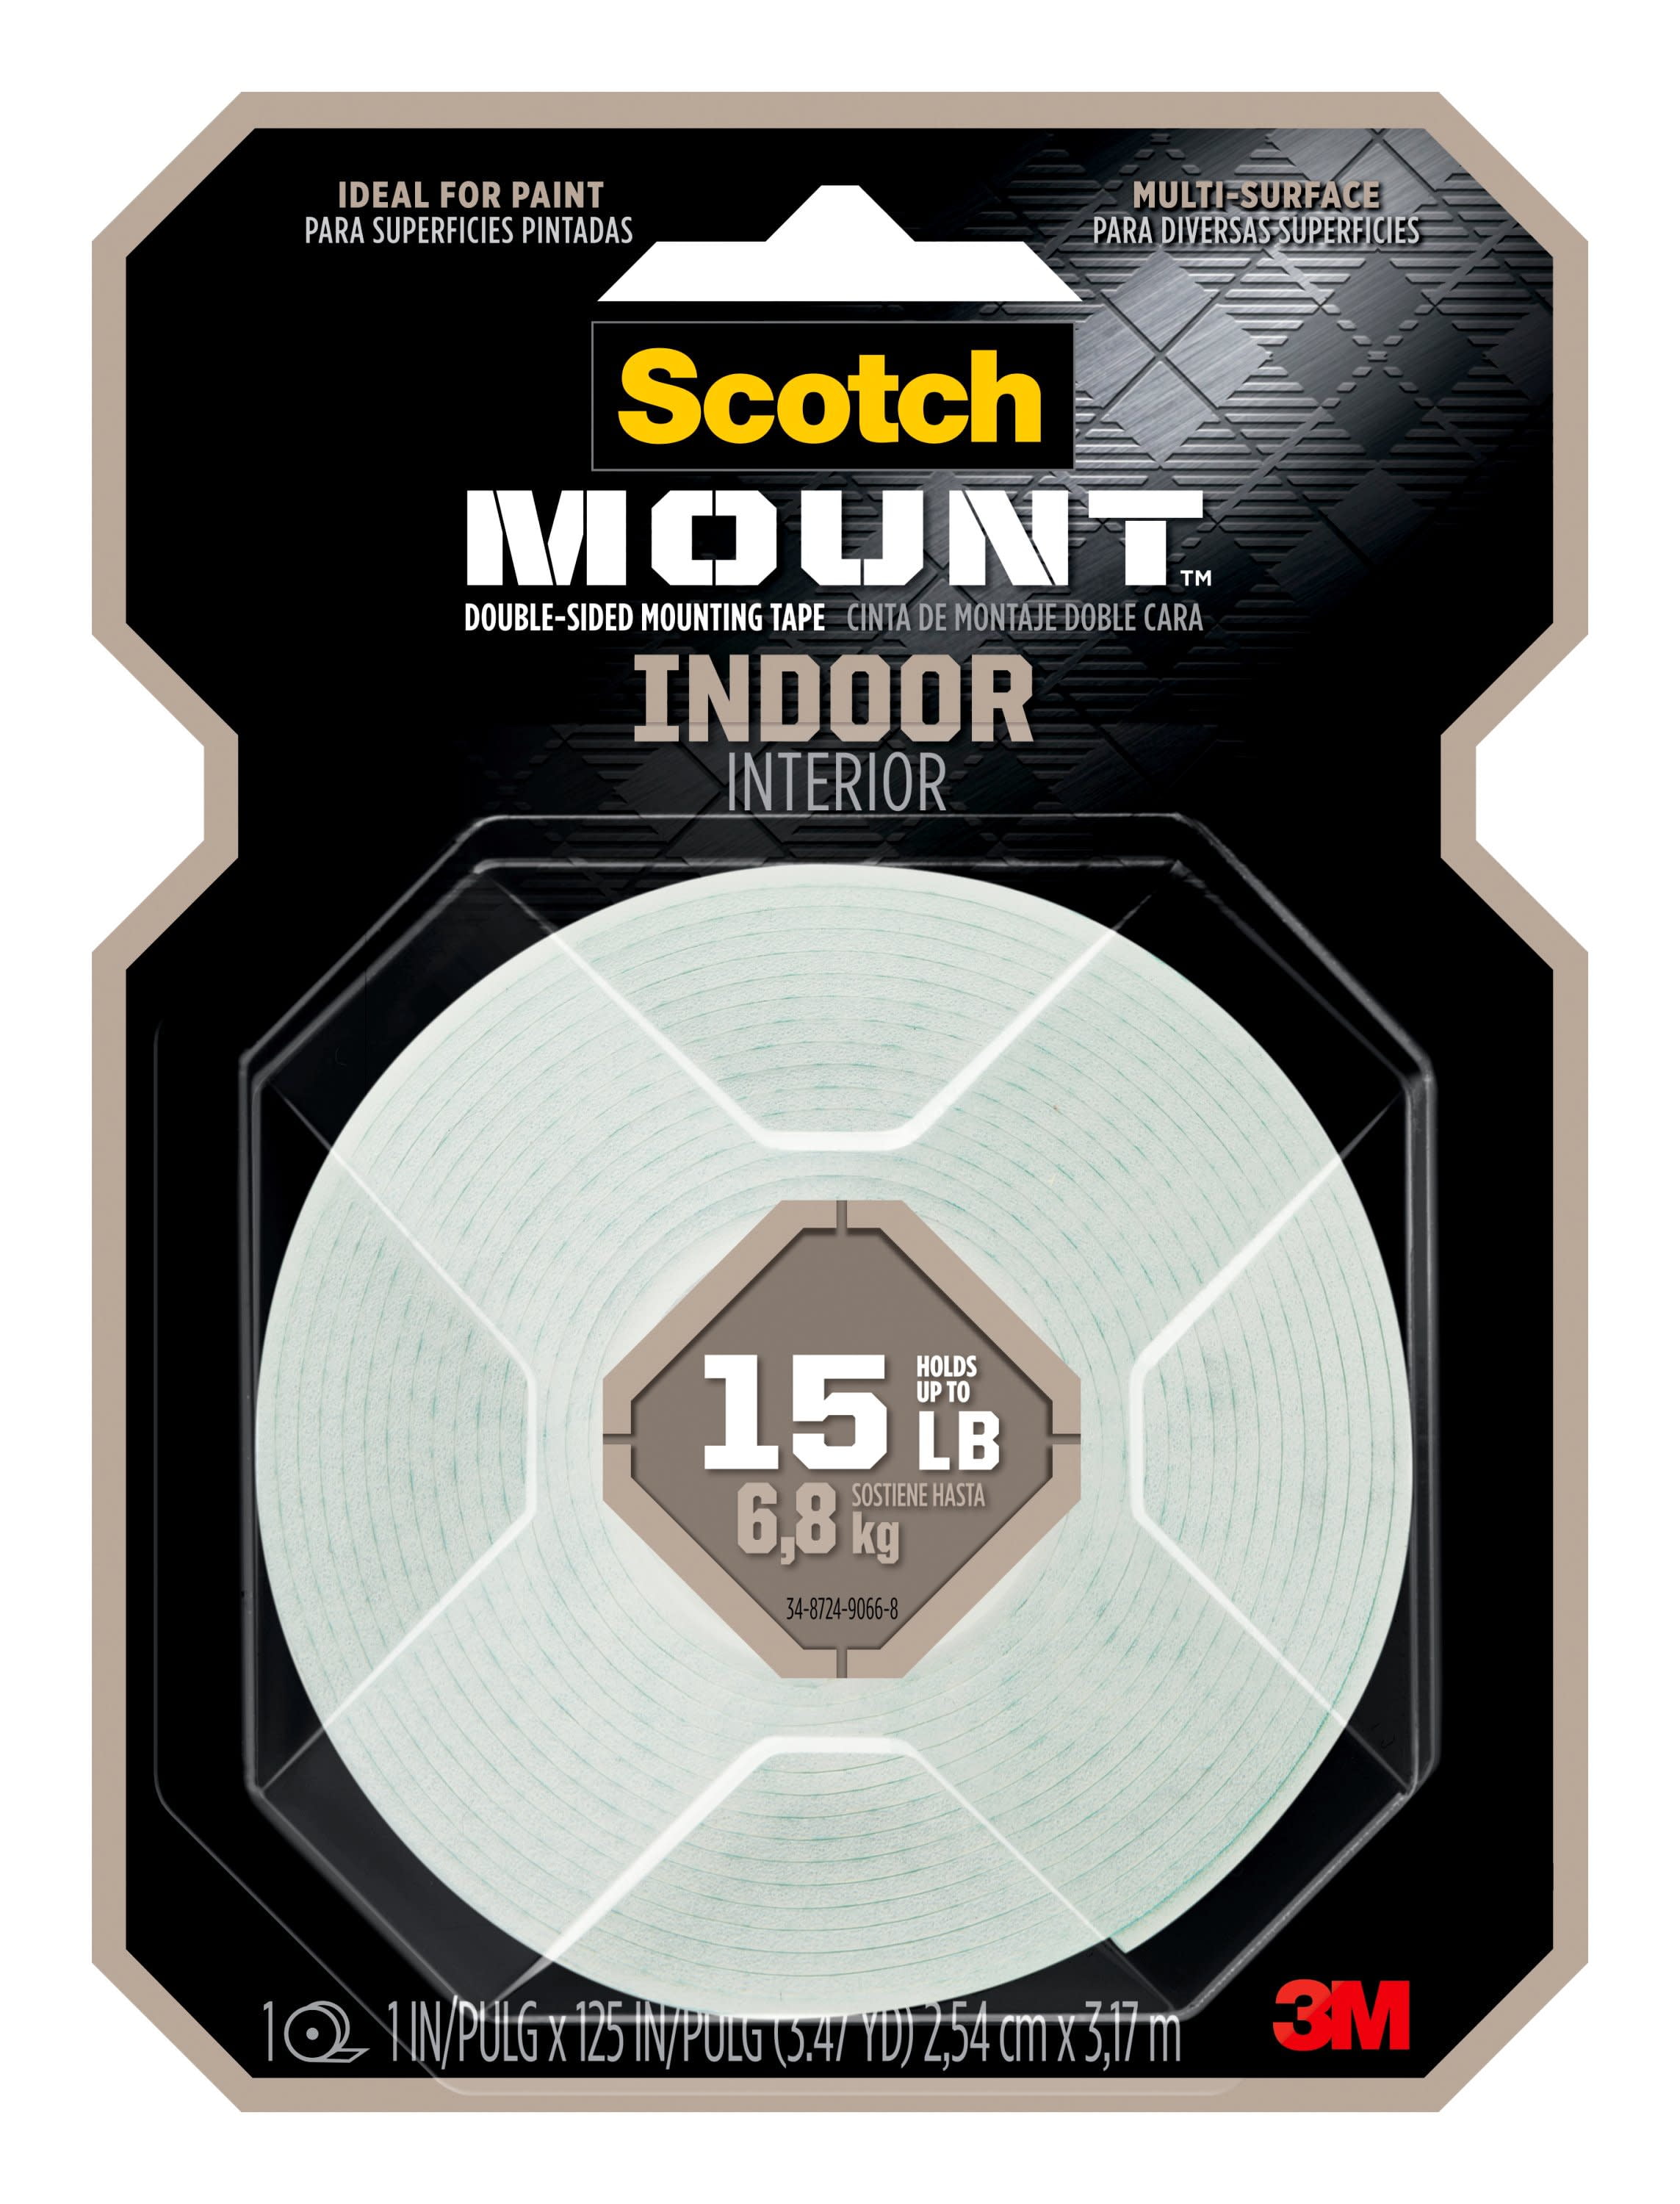 Scotch-Mount Indoor Double-Sided Mounting Tape 314H-MED, 1 in x 125 in